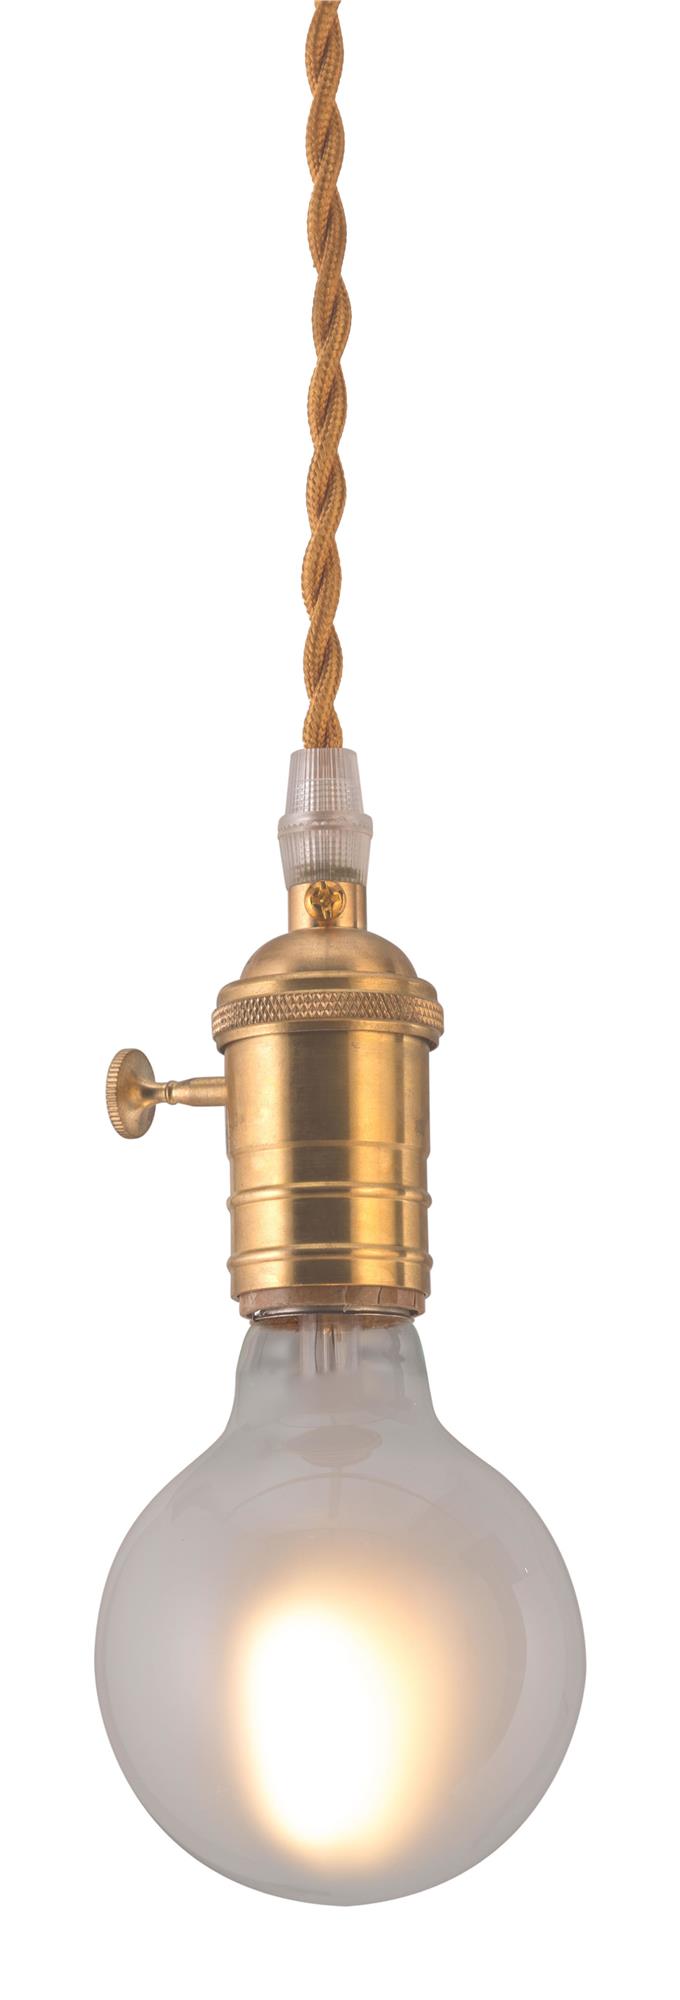 Brass-made ceiling light with rotary switch by Giu -  N/A